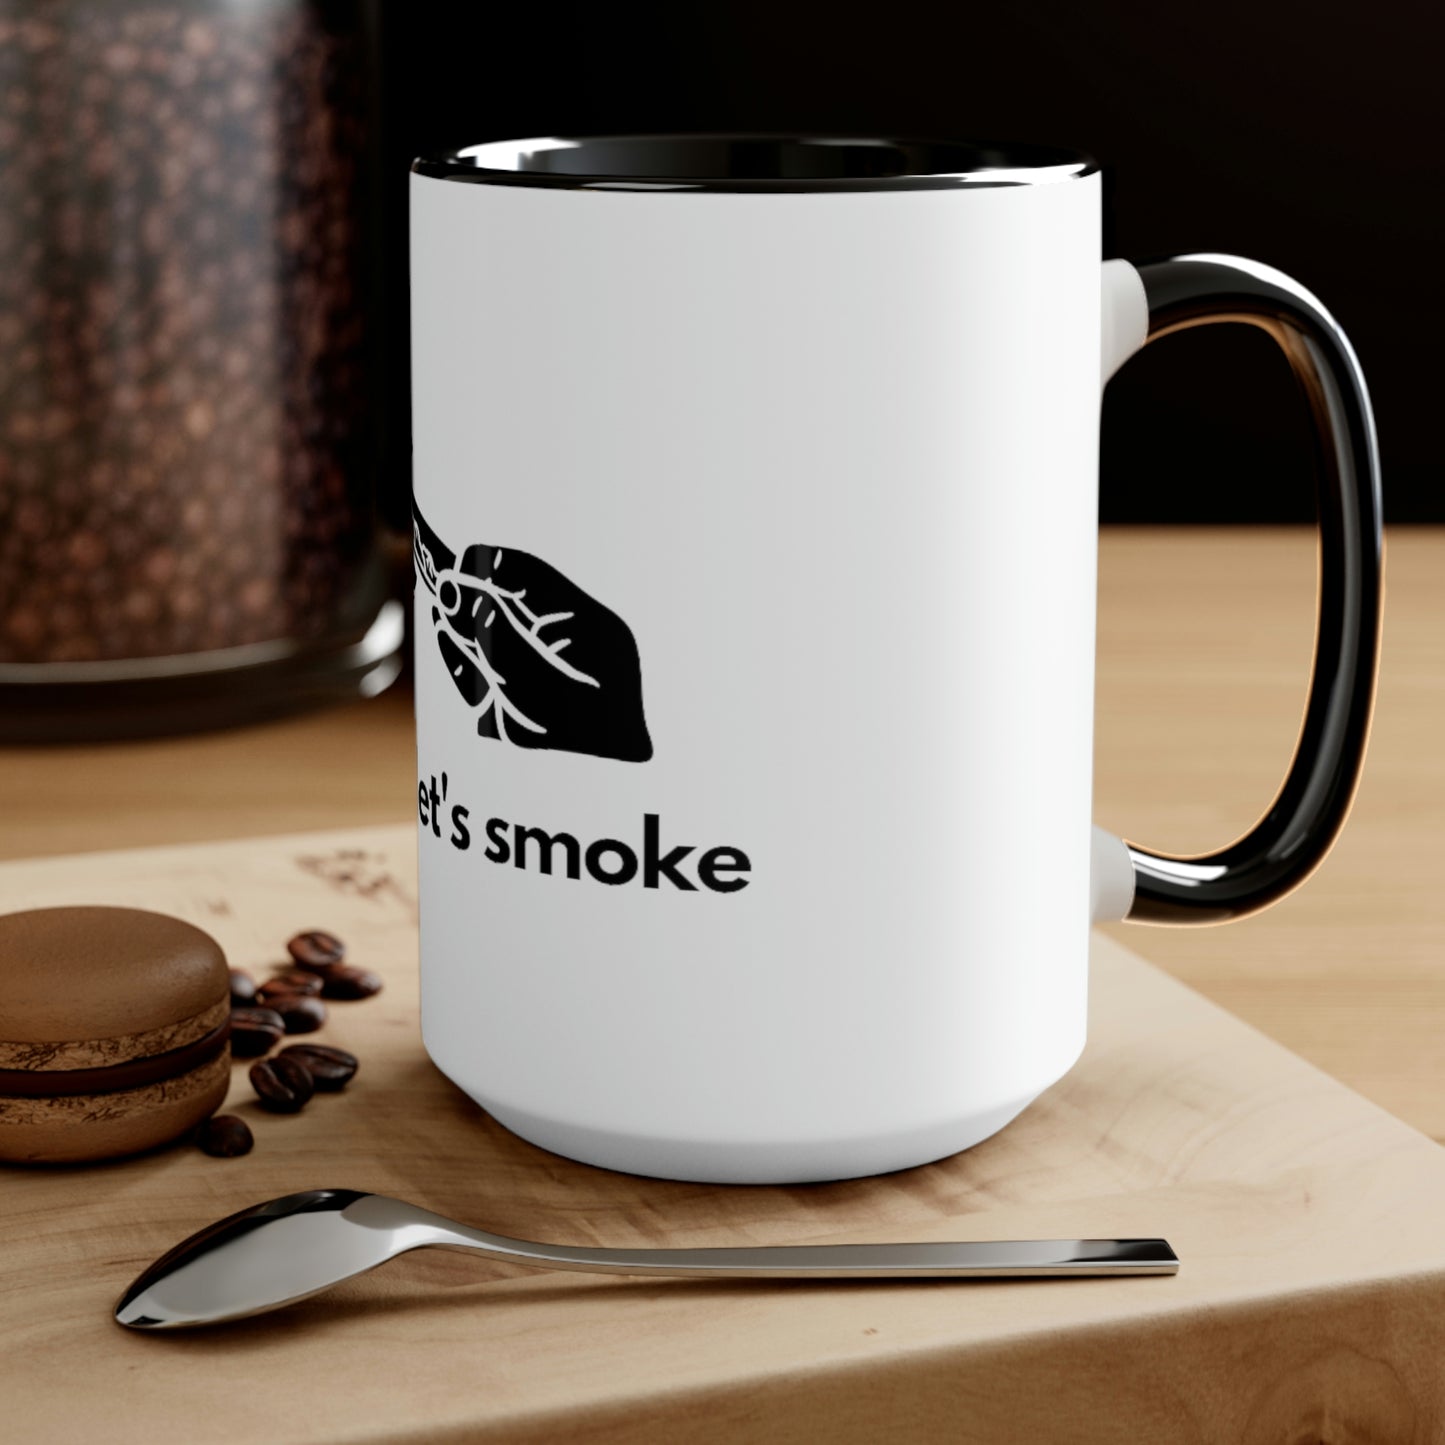 a But First, Let's Smoke Coffee Mug with the word smoke on it.